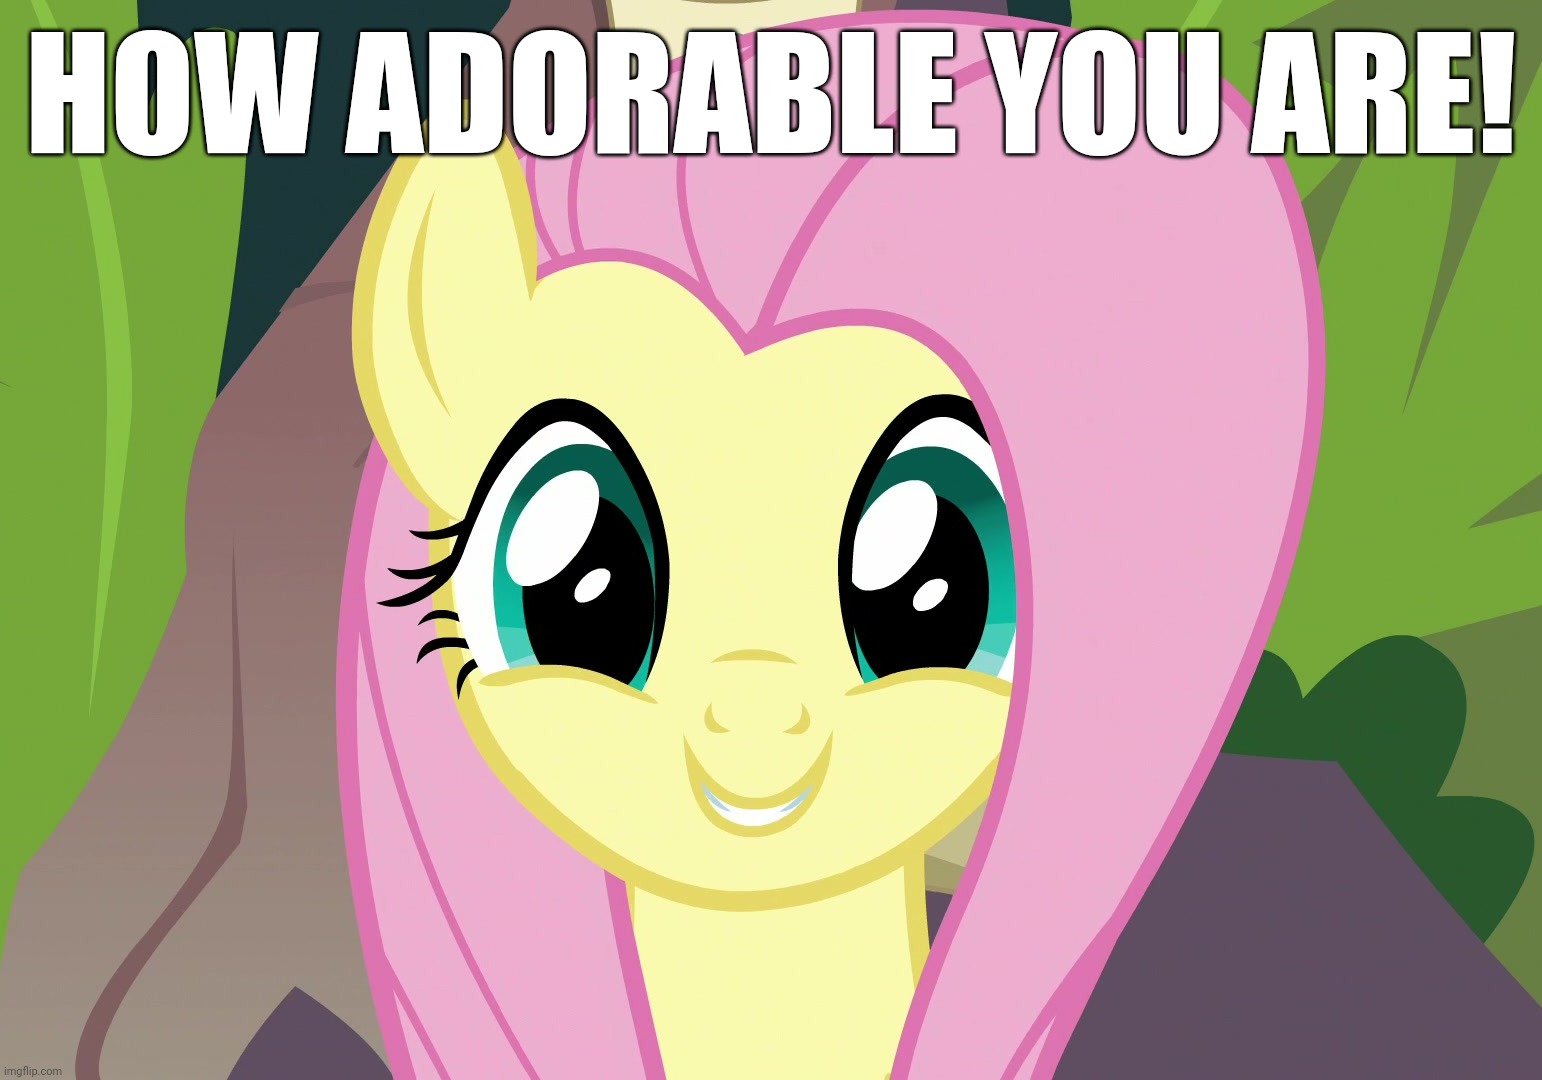 HOW ADORABLE YOU ARE! | made w/ Imgflip meme maker